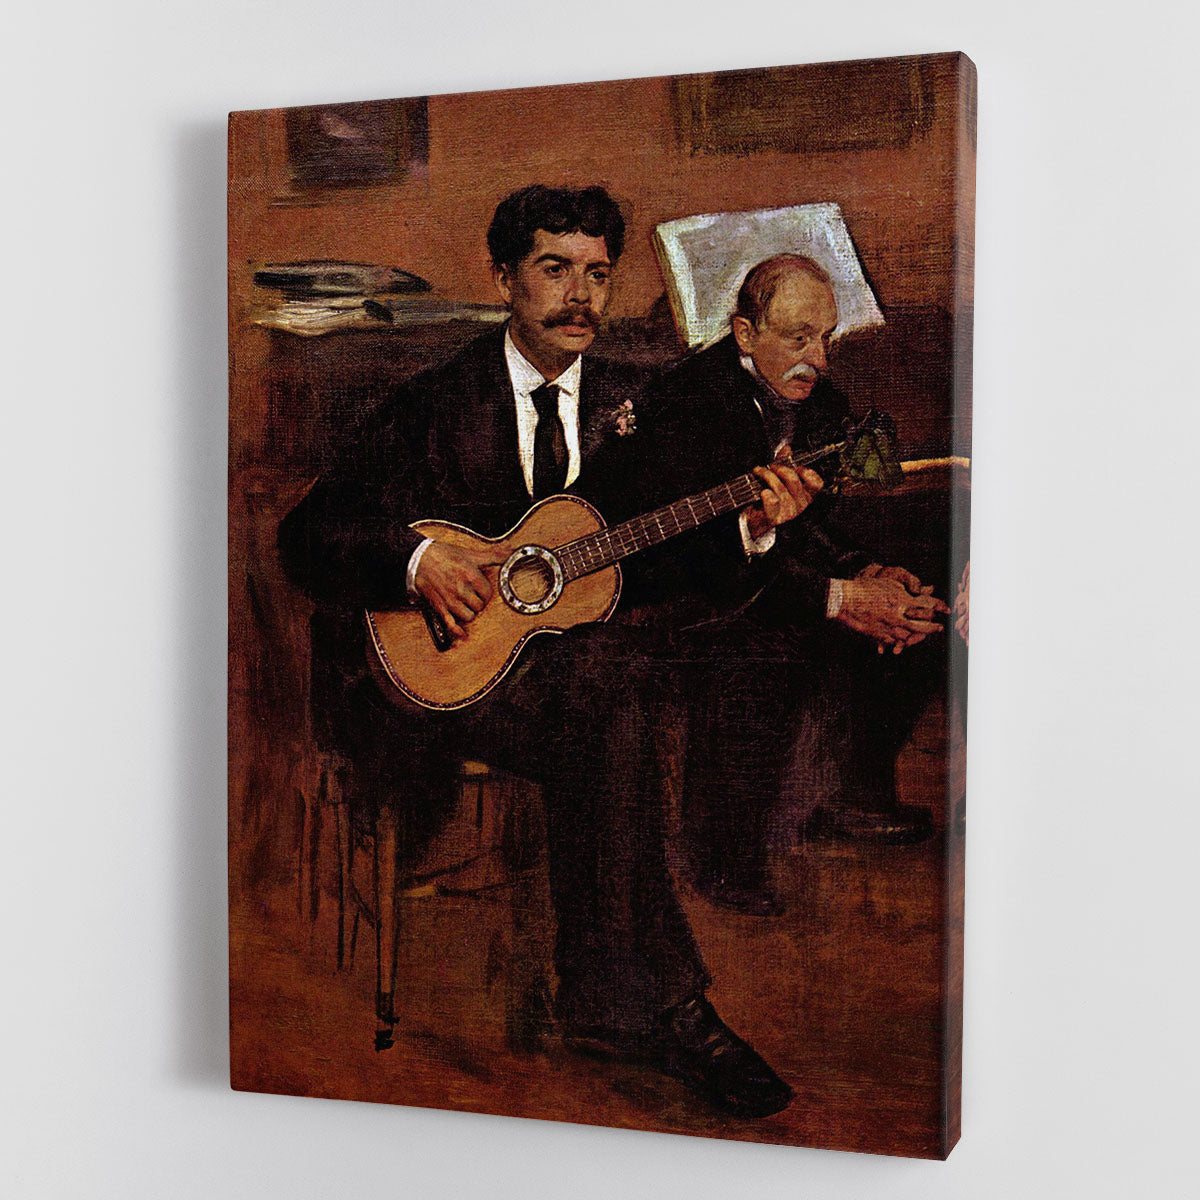 The guitarist Pagans and Monsieur Degas by Manet Canvas Print or Poster - Canvas Art Rocks - 1